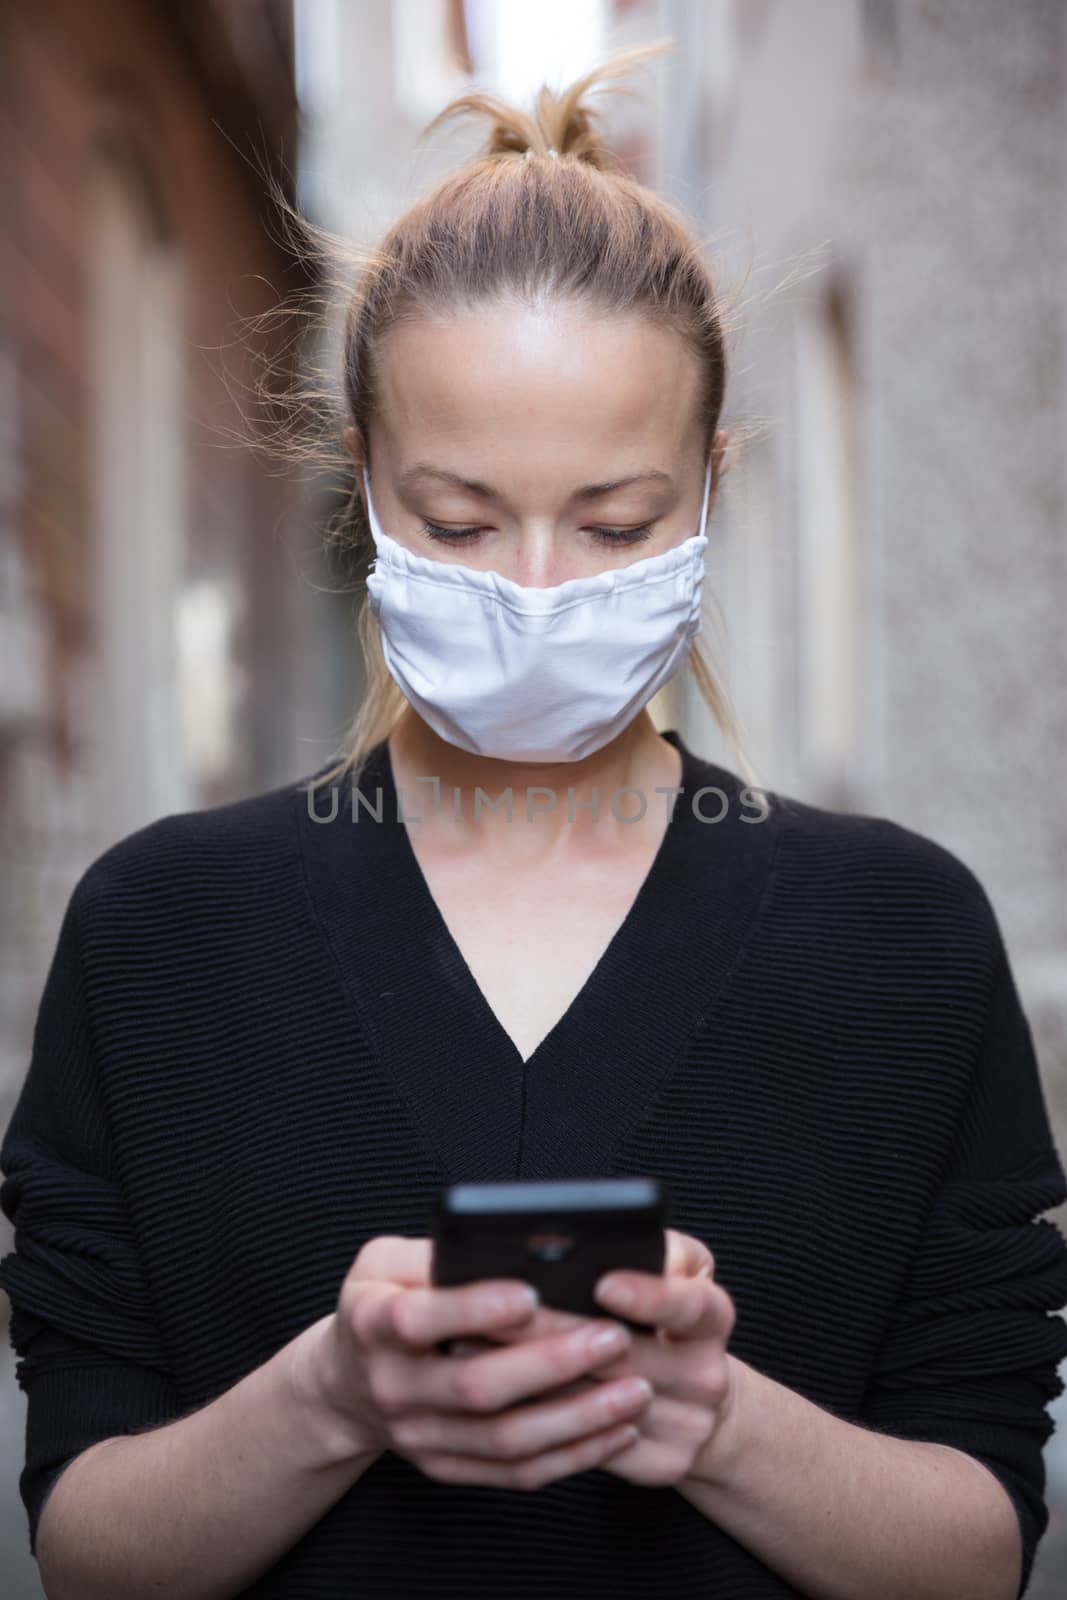 COVID-19 pandemic coronavirus. Casual caucasian woman at medieval city street using mobile phone, wearing protective face mask against spreading of coronavirus and disease transmission.